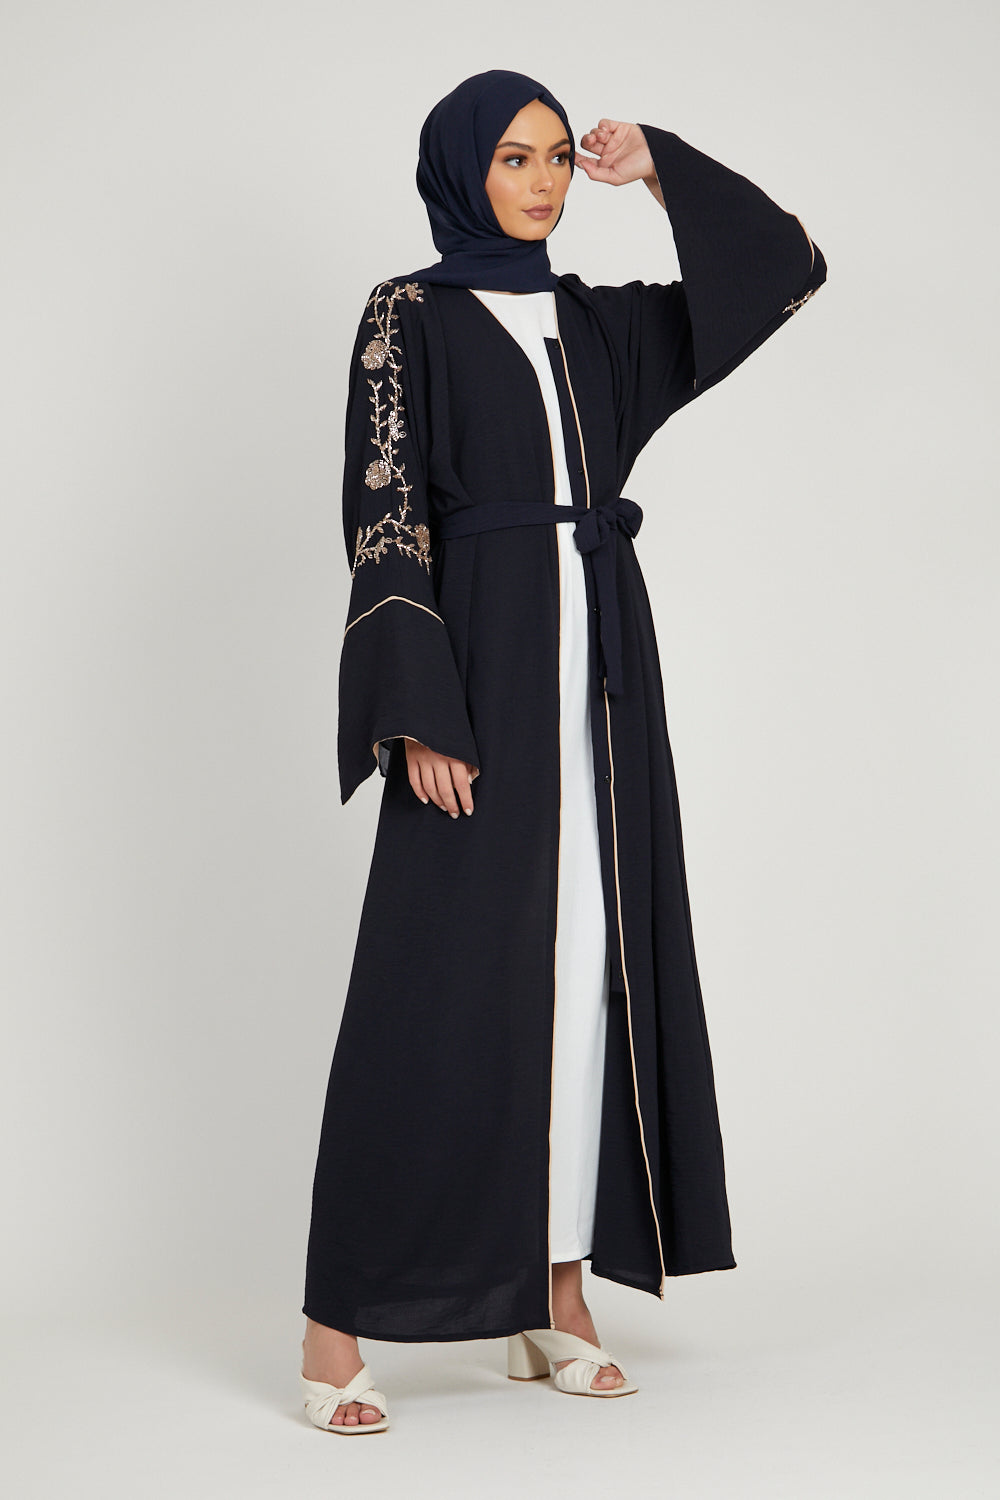 Floral Embellished Contrast Cuff Open Abaya - Deep Navy